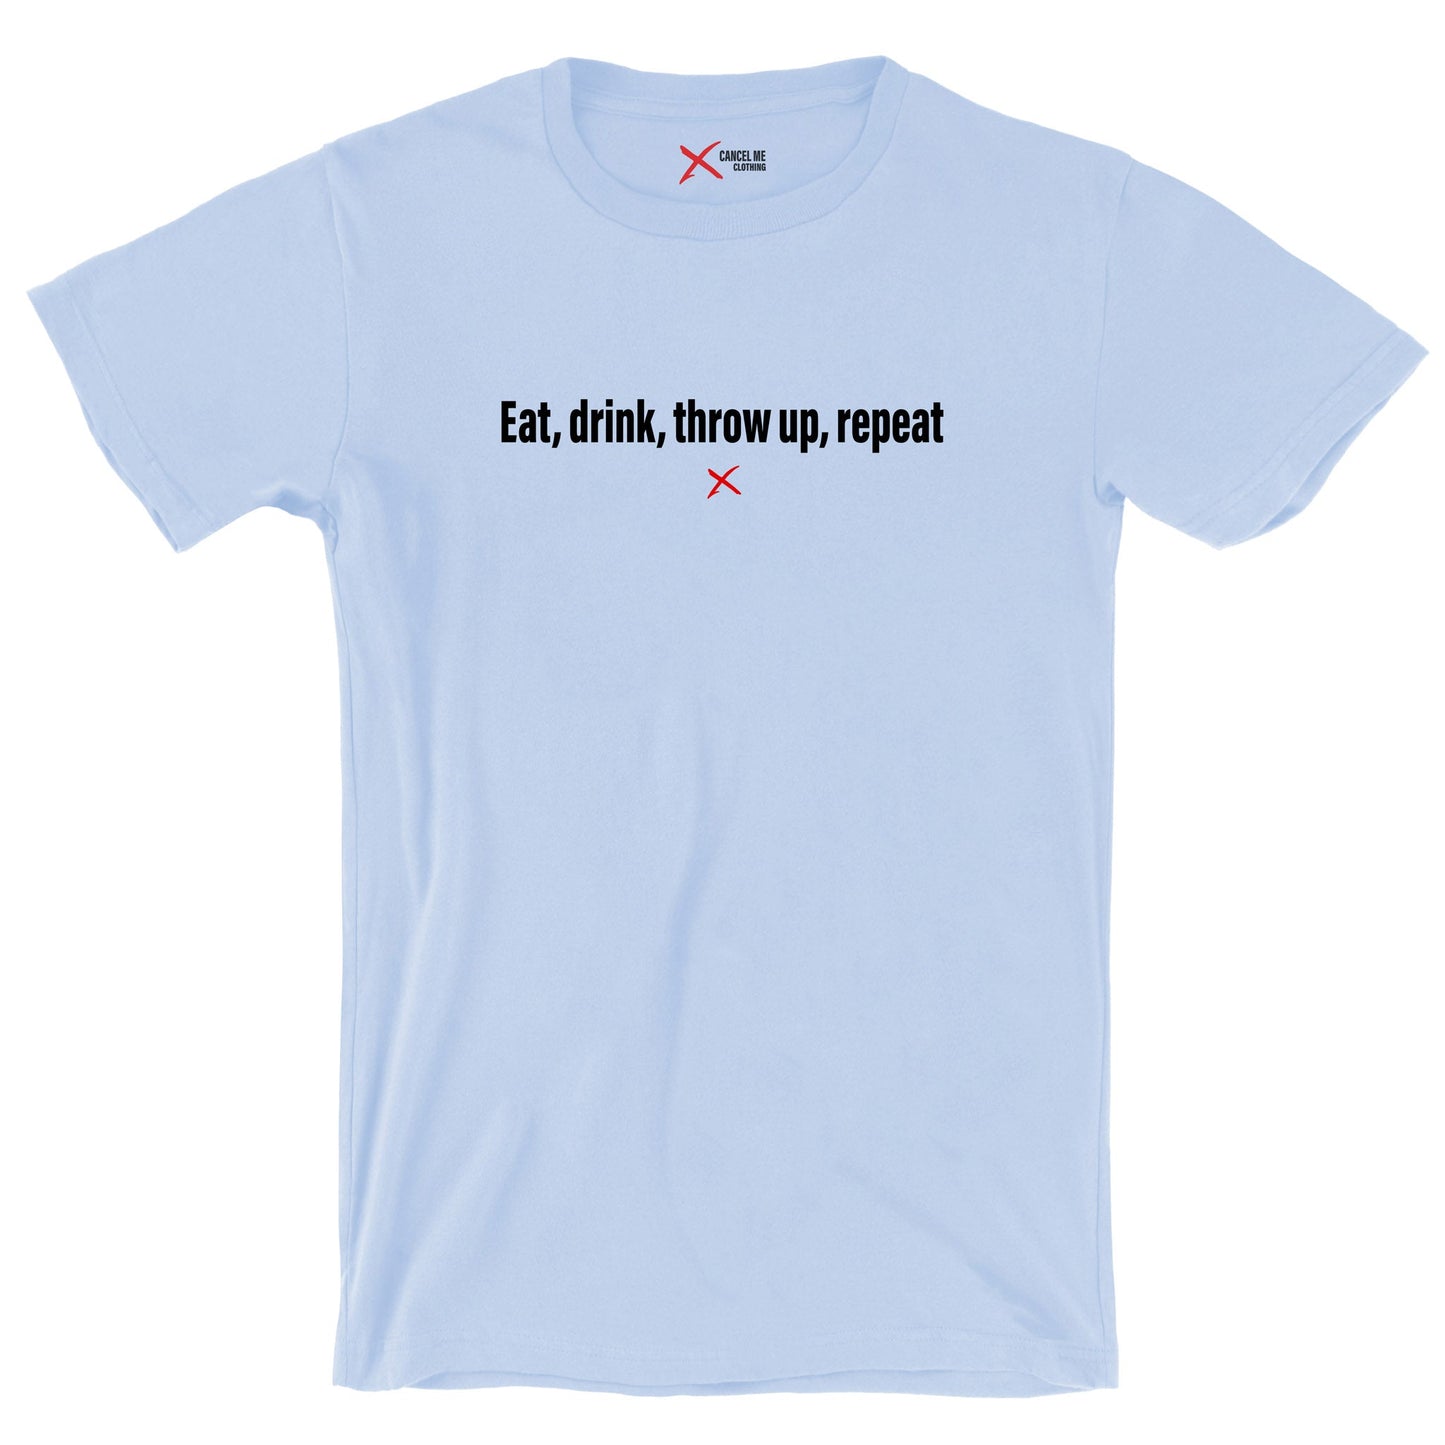 Eat, drink, throw up, repeat - Shirt